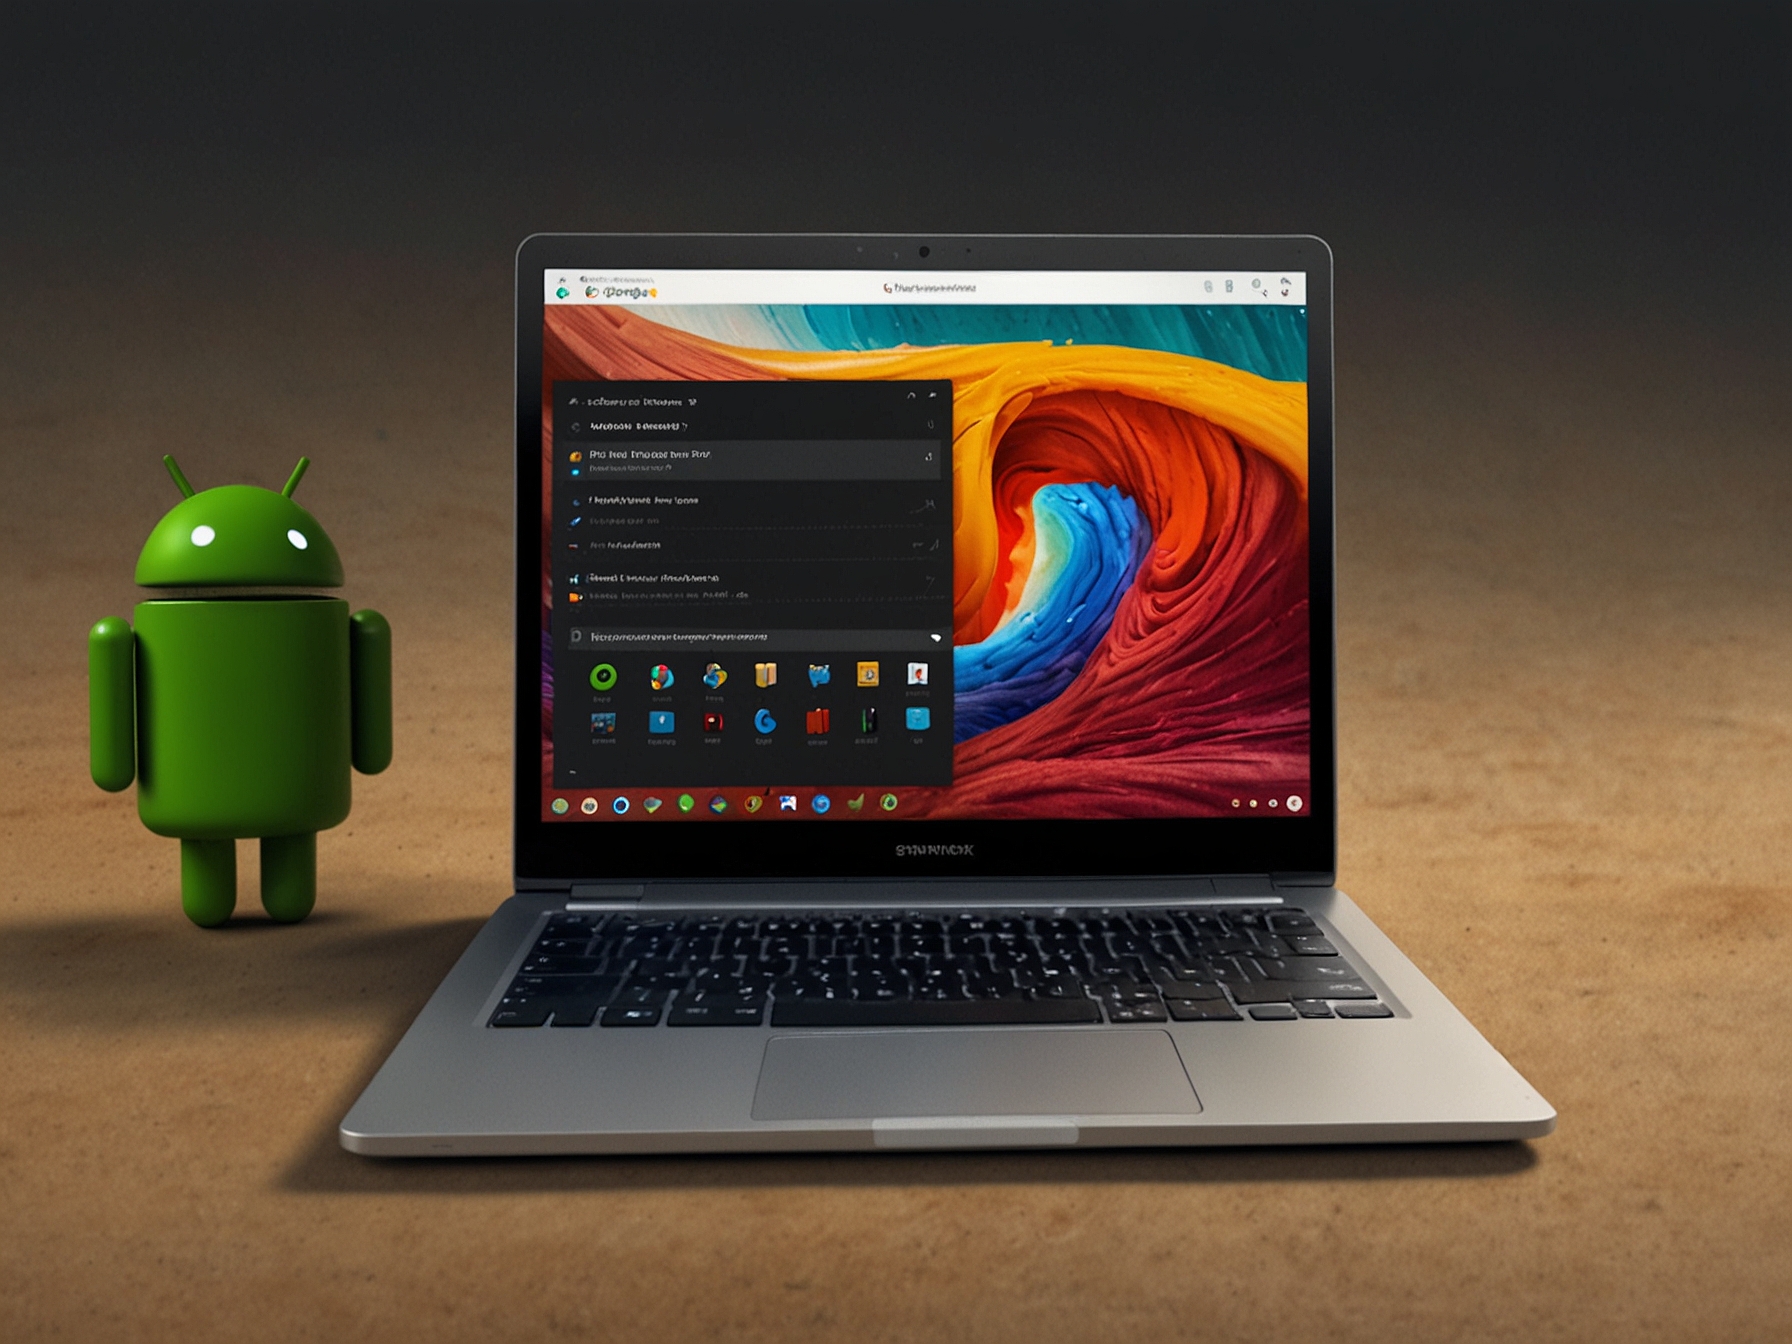 A graphic demonstrating the Quick Start Android setup feature, highlighting the ease and speed of configuring Android apps on a Chromebook with this new streamlined process.